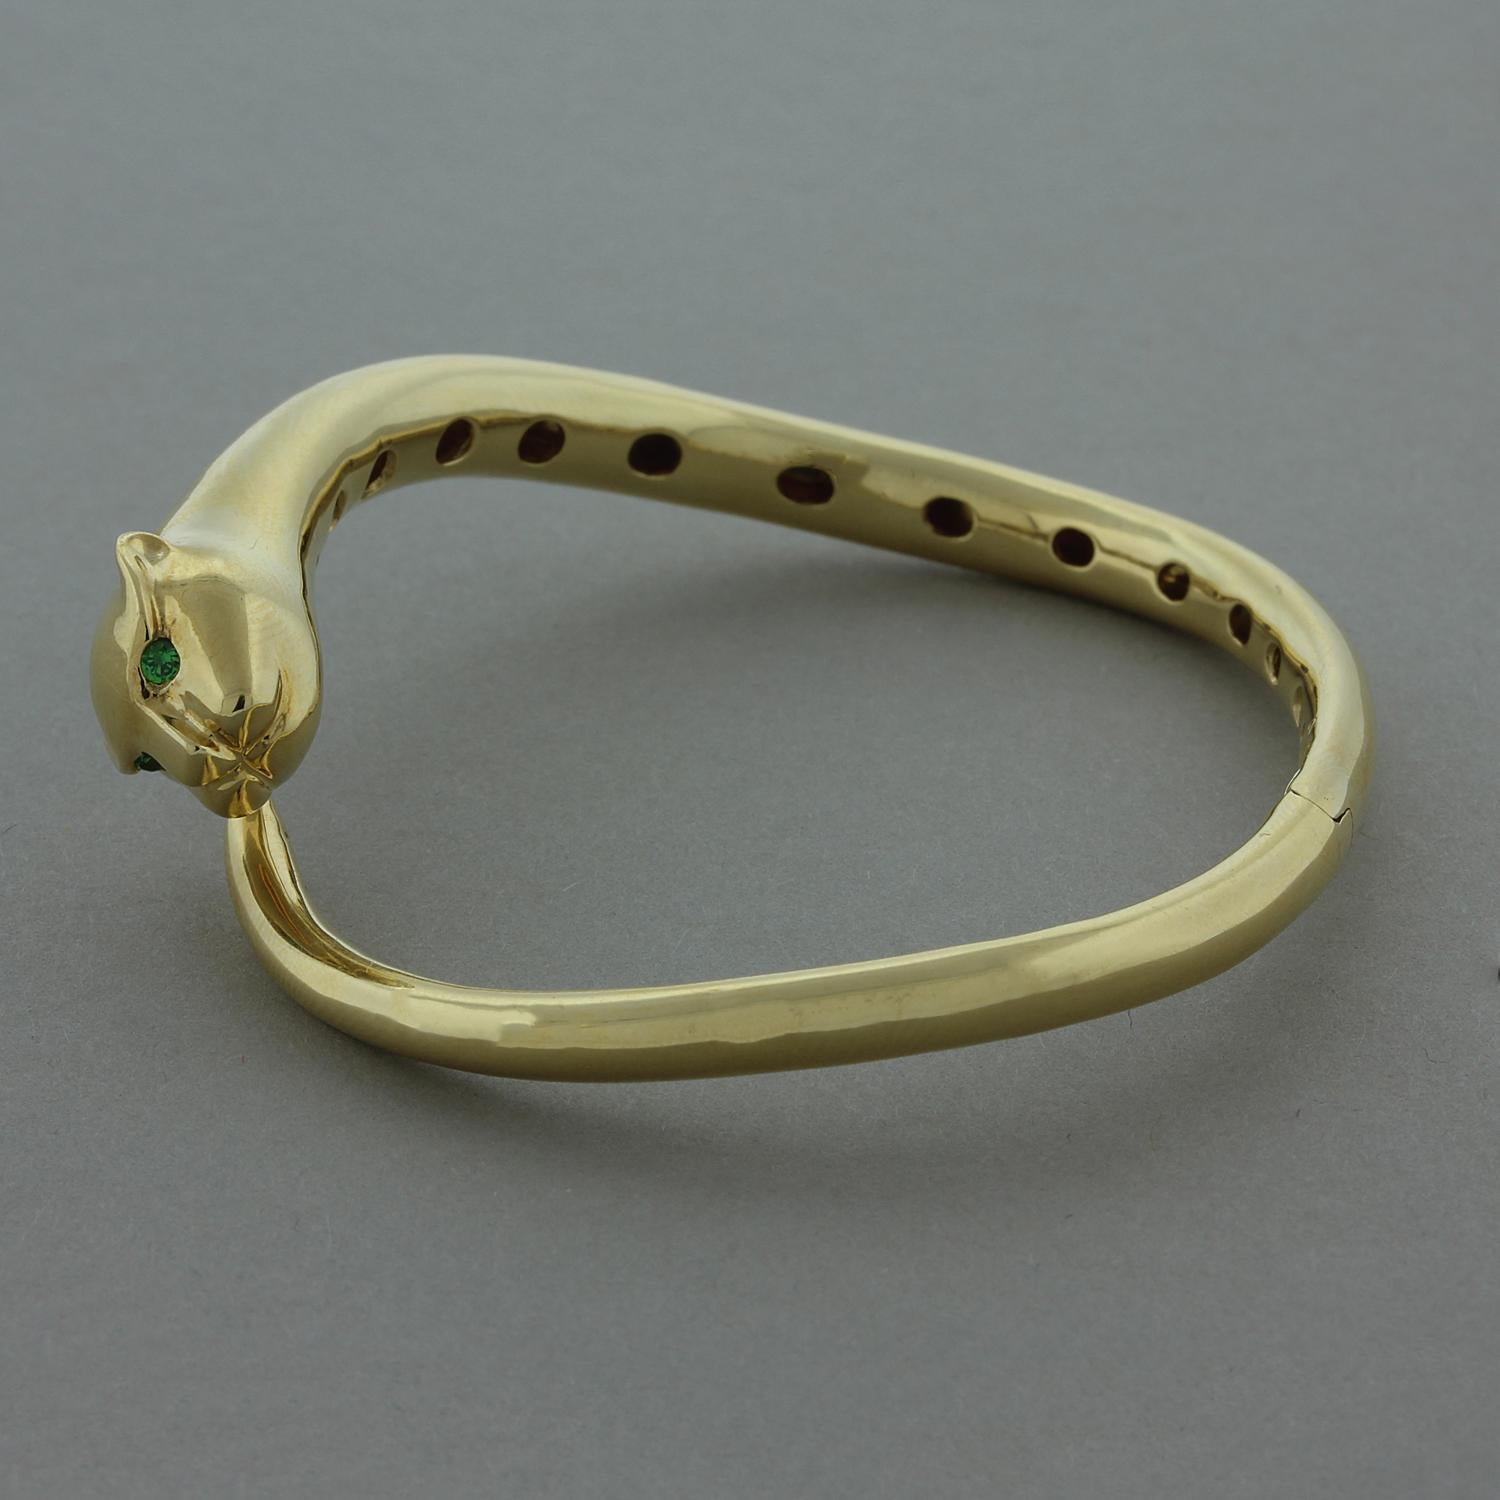 A royal panther cuff with round cut tsavorite for piercing eyes. This 18K yellow gold cuff has a hidden and comfortable opening with easy closure for this sleek bracelet.

Bracelet Length: 6.75
Weight: 25.00 grams
